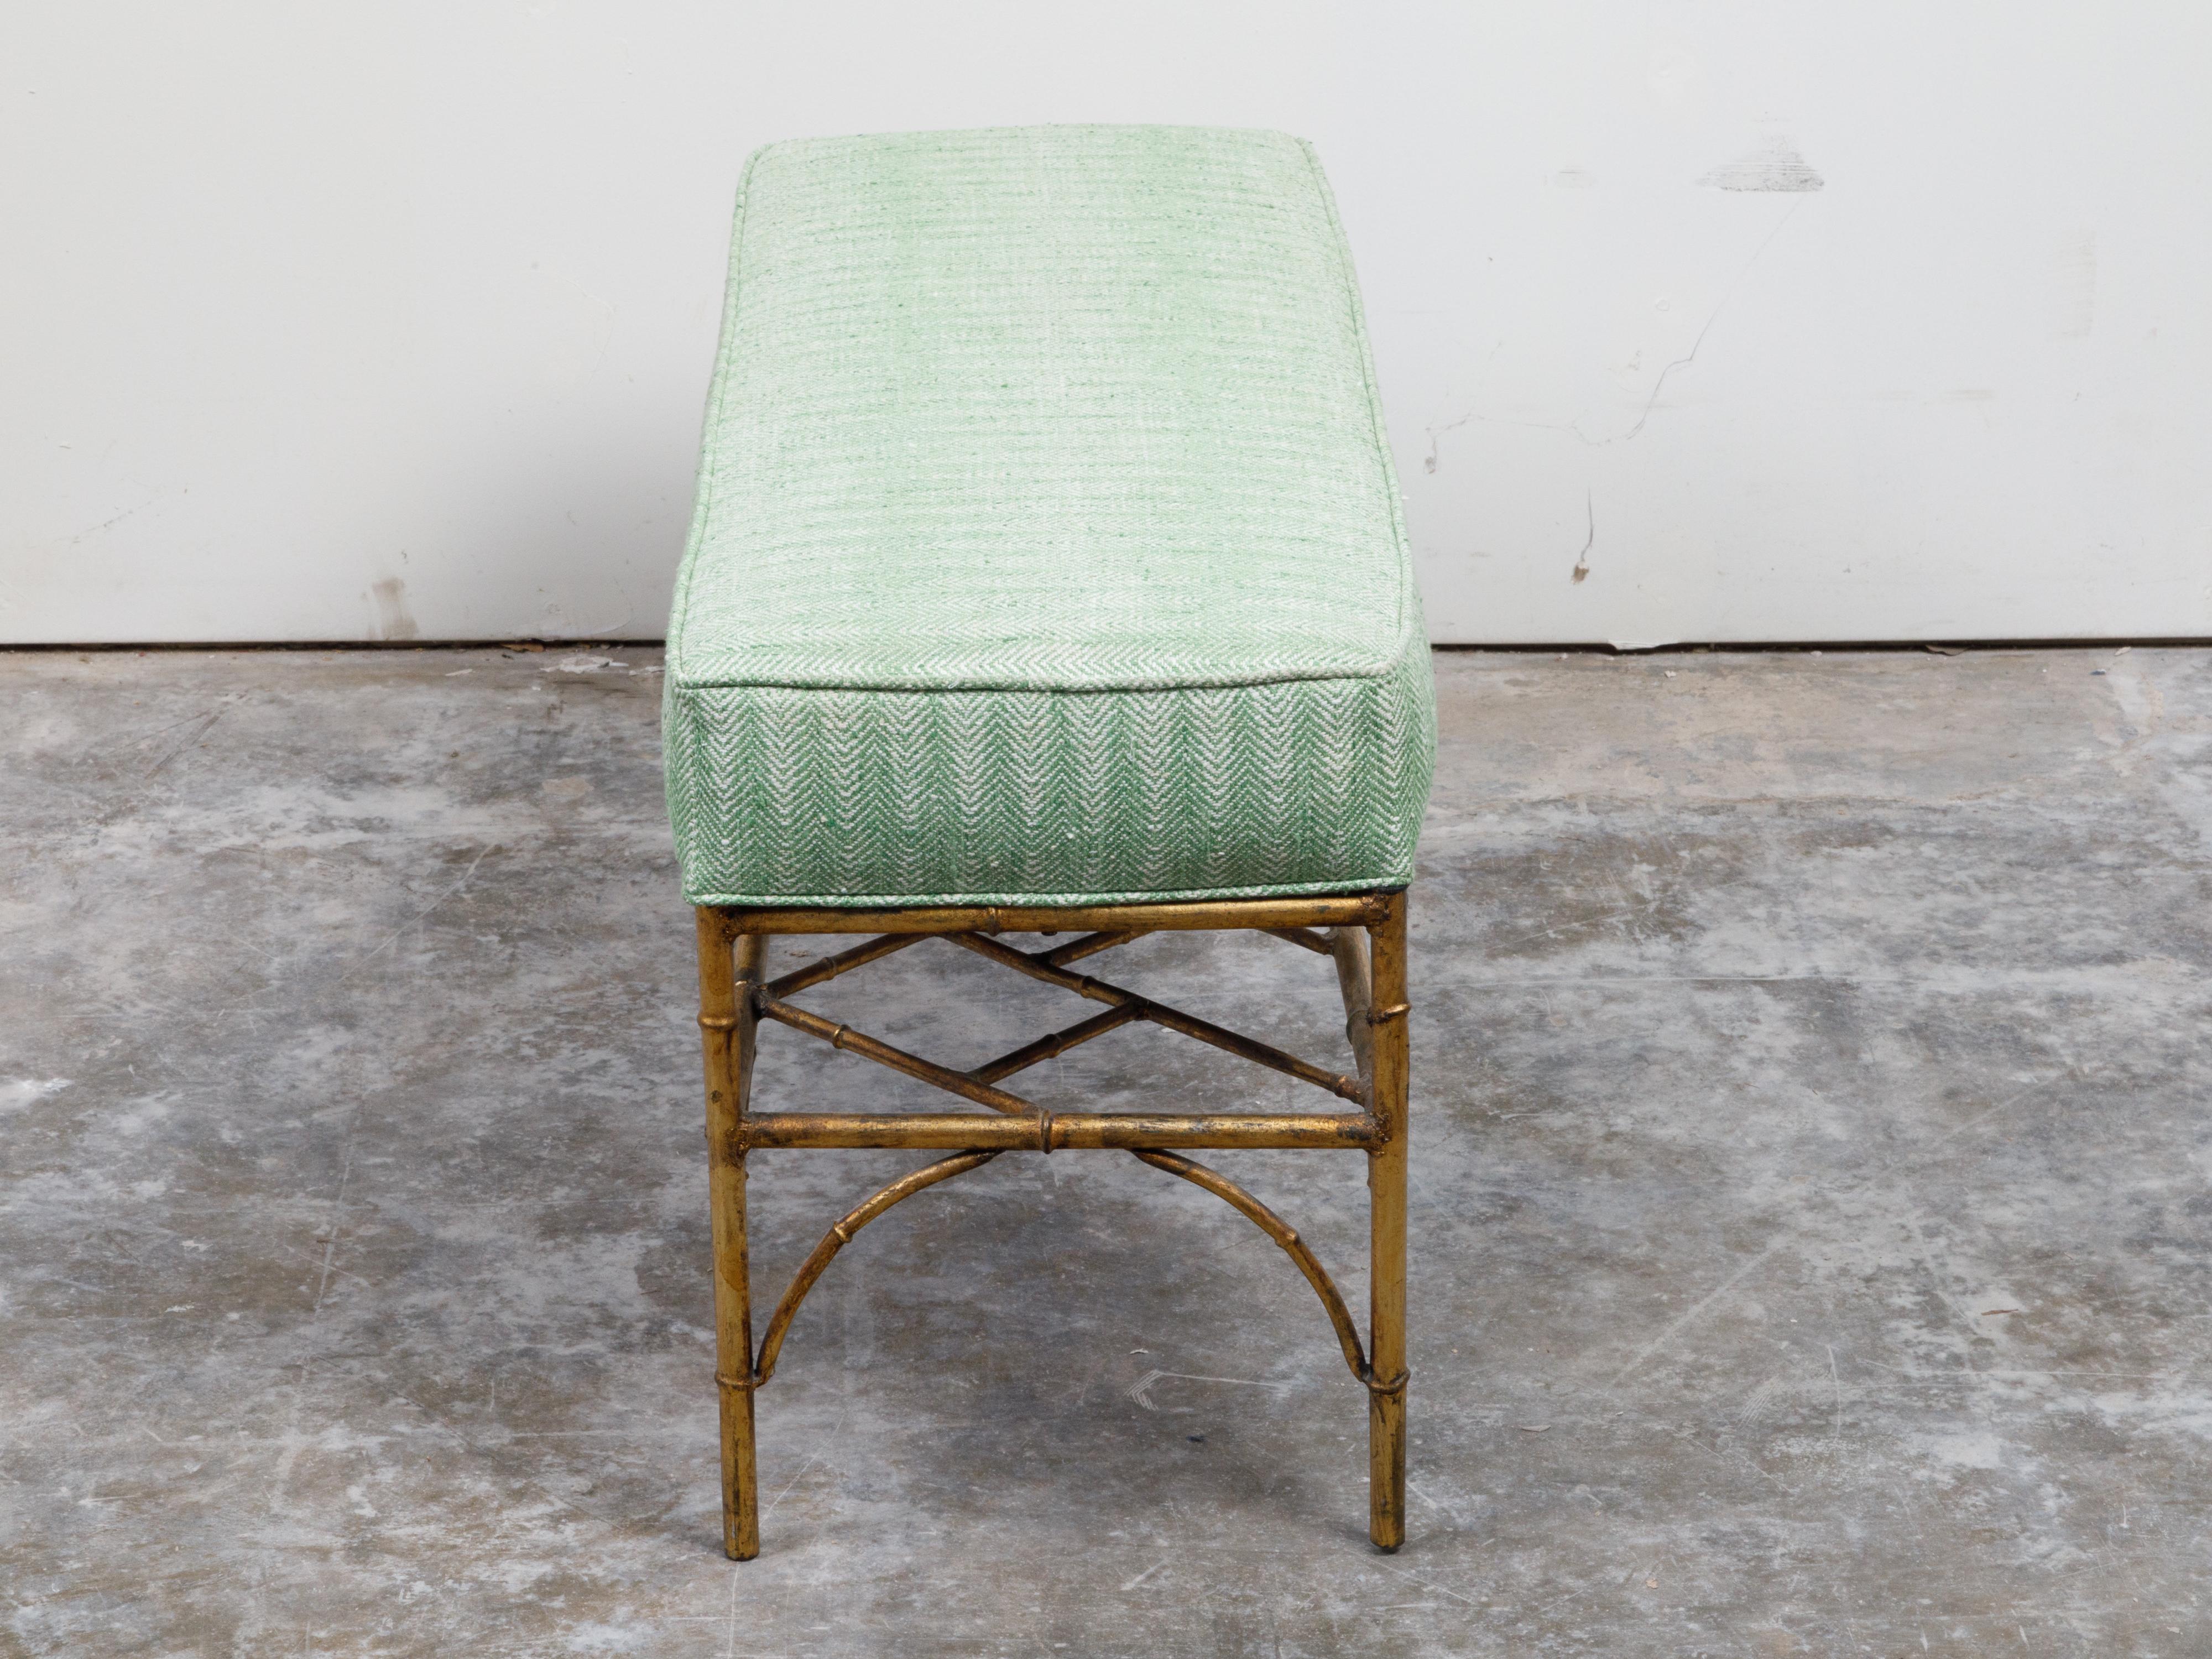 Italian Midcentury Gilt Metal Faux Bamboo Bench with Green Upholstered Seat For Sale 2